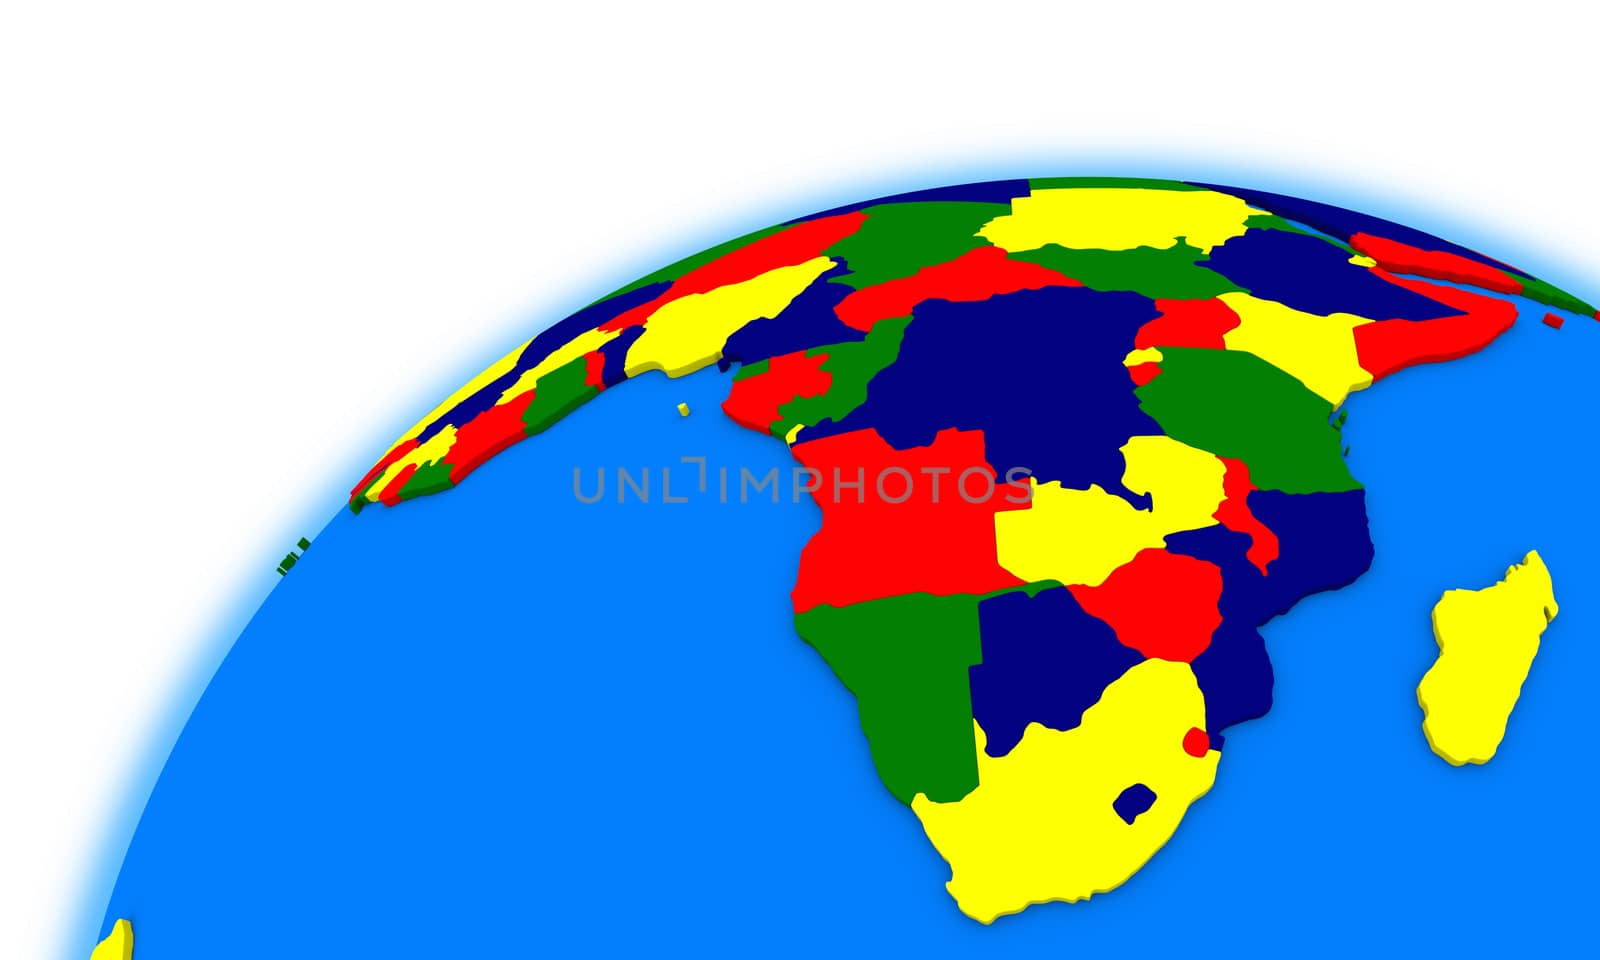 south Africa on globe political map by Harvepino